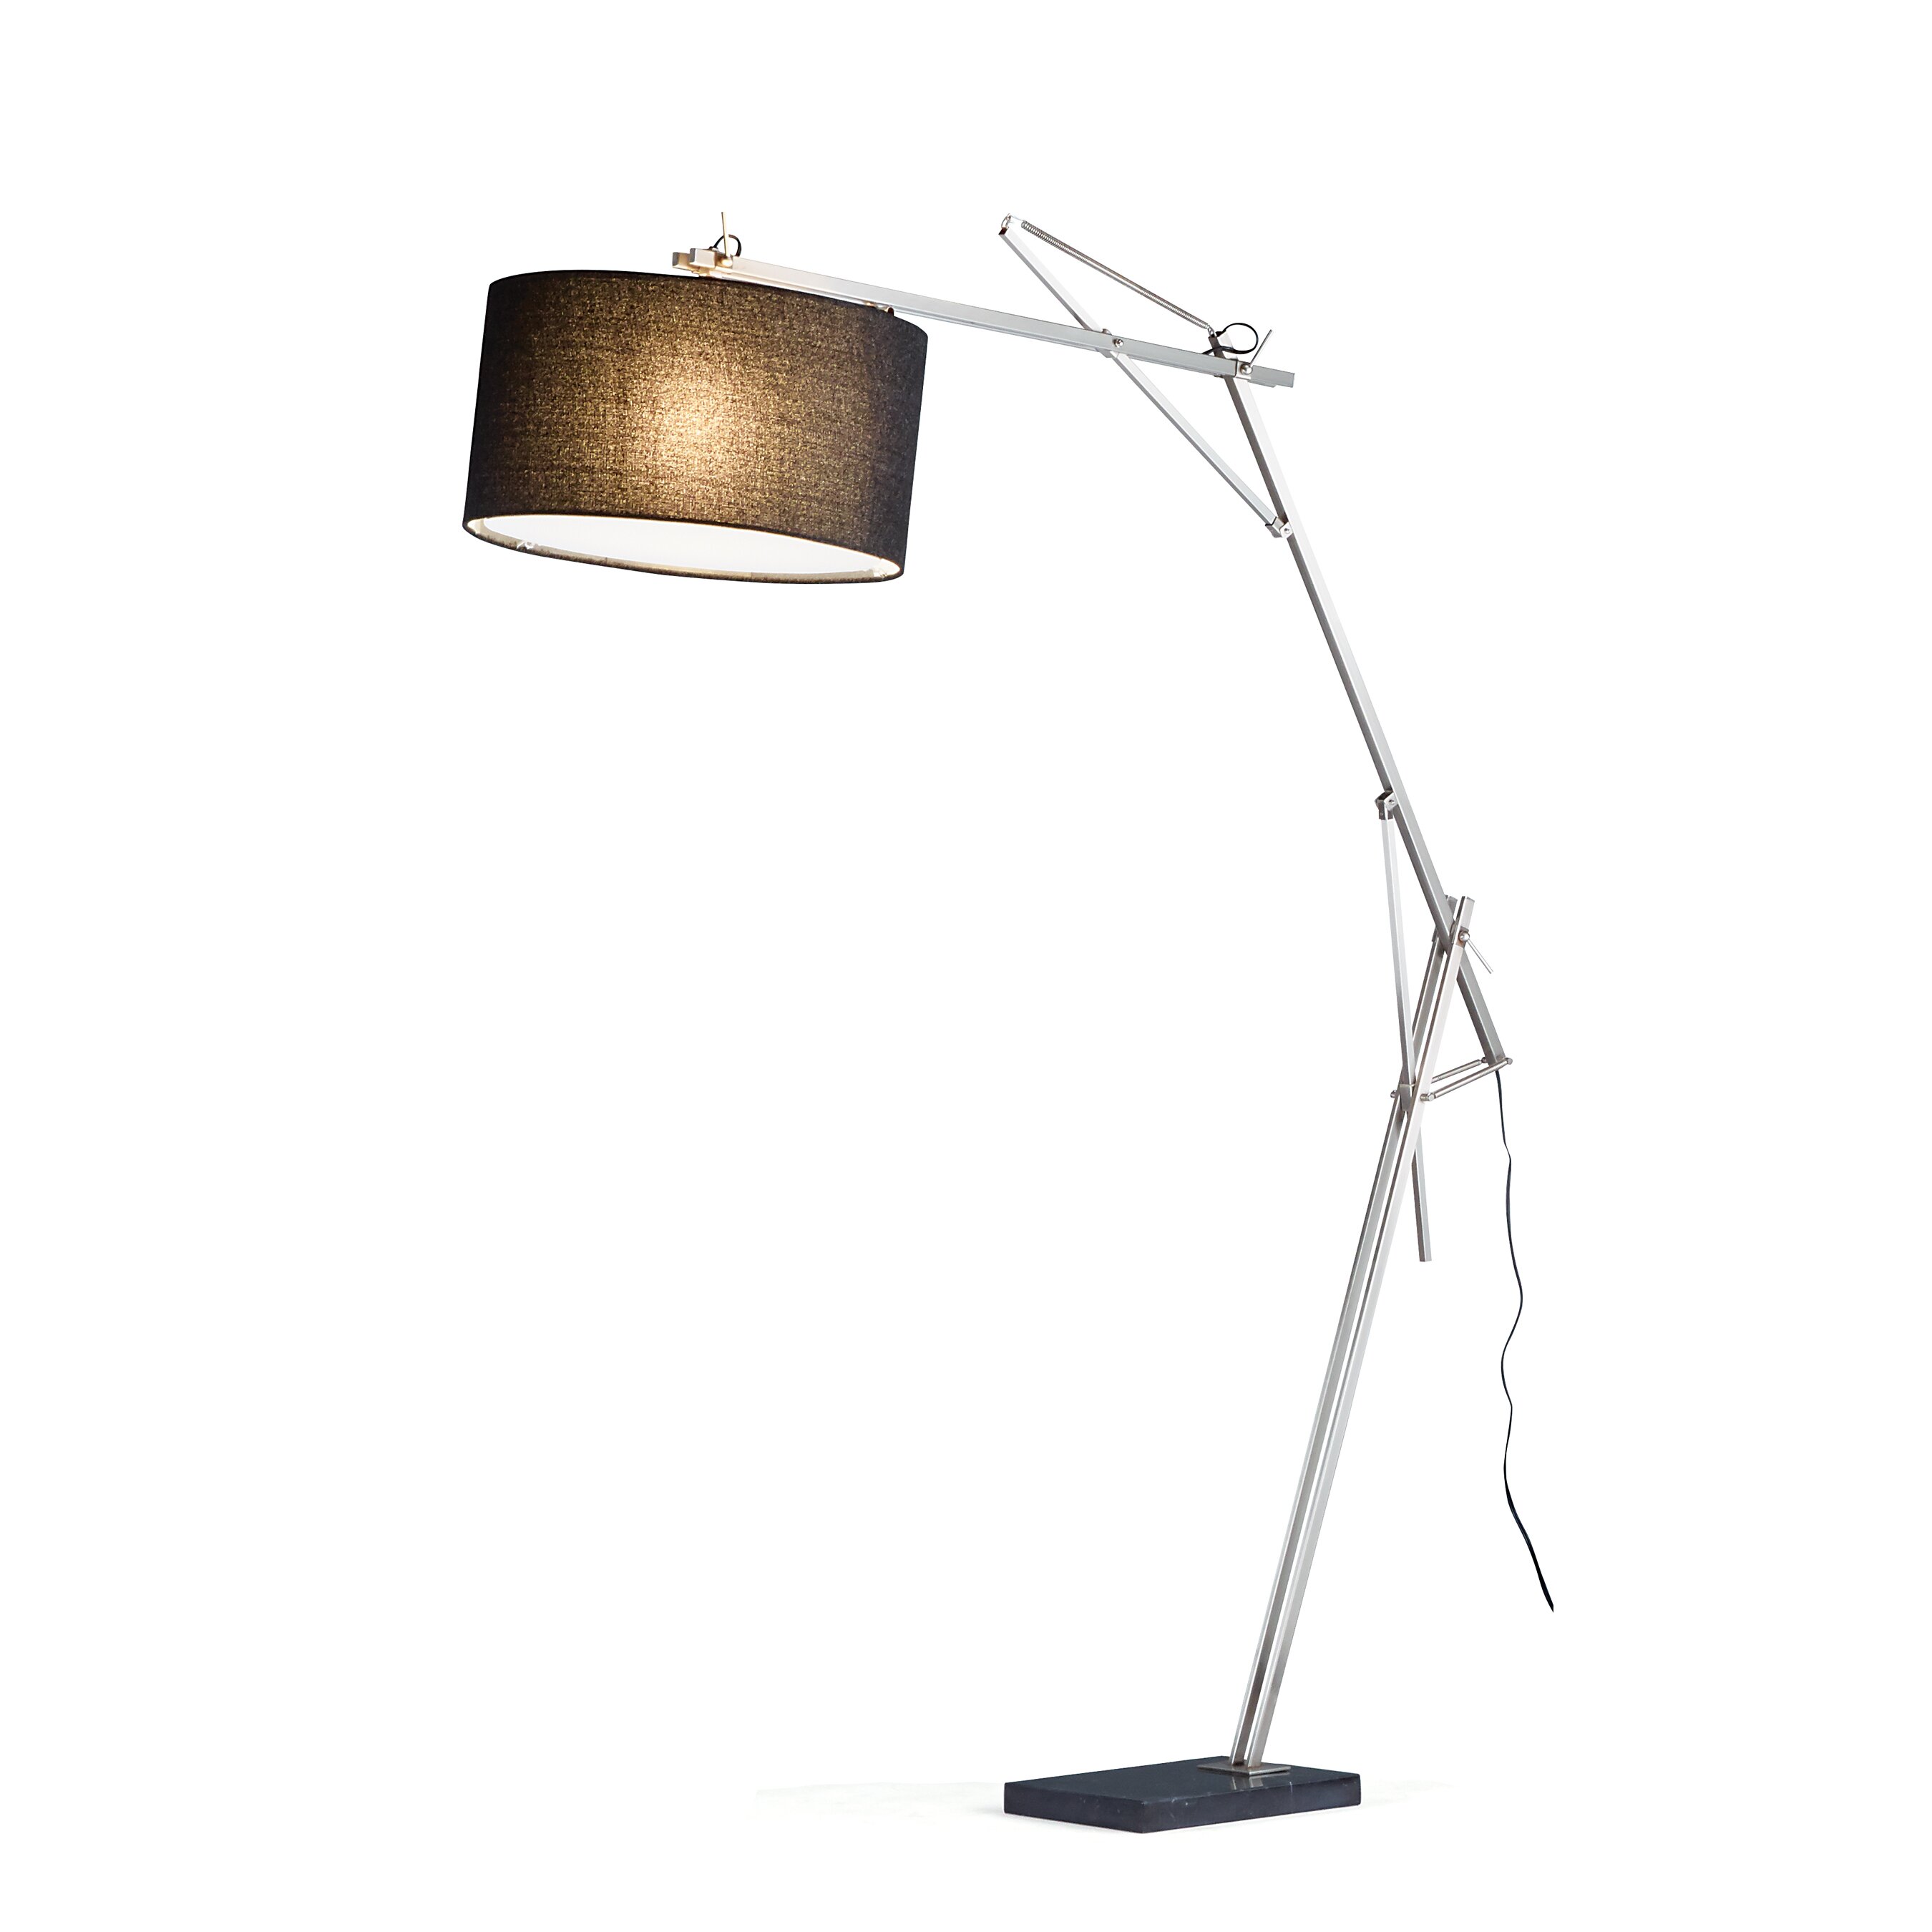 Adesso Suffolk 90" Arched Floor Lamp & Reviews | Wayfair